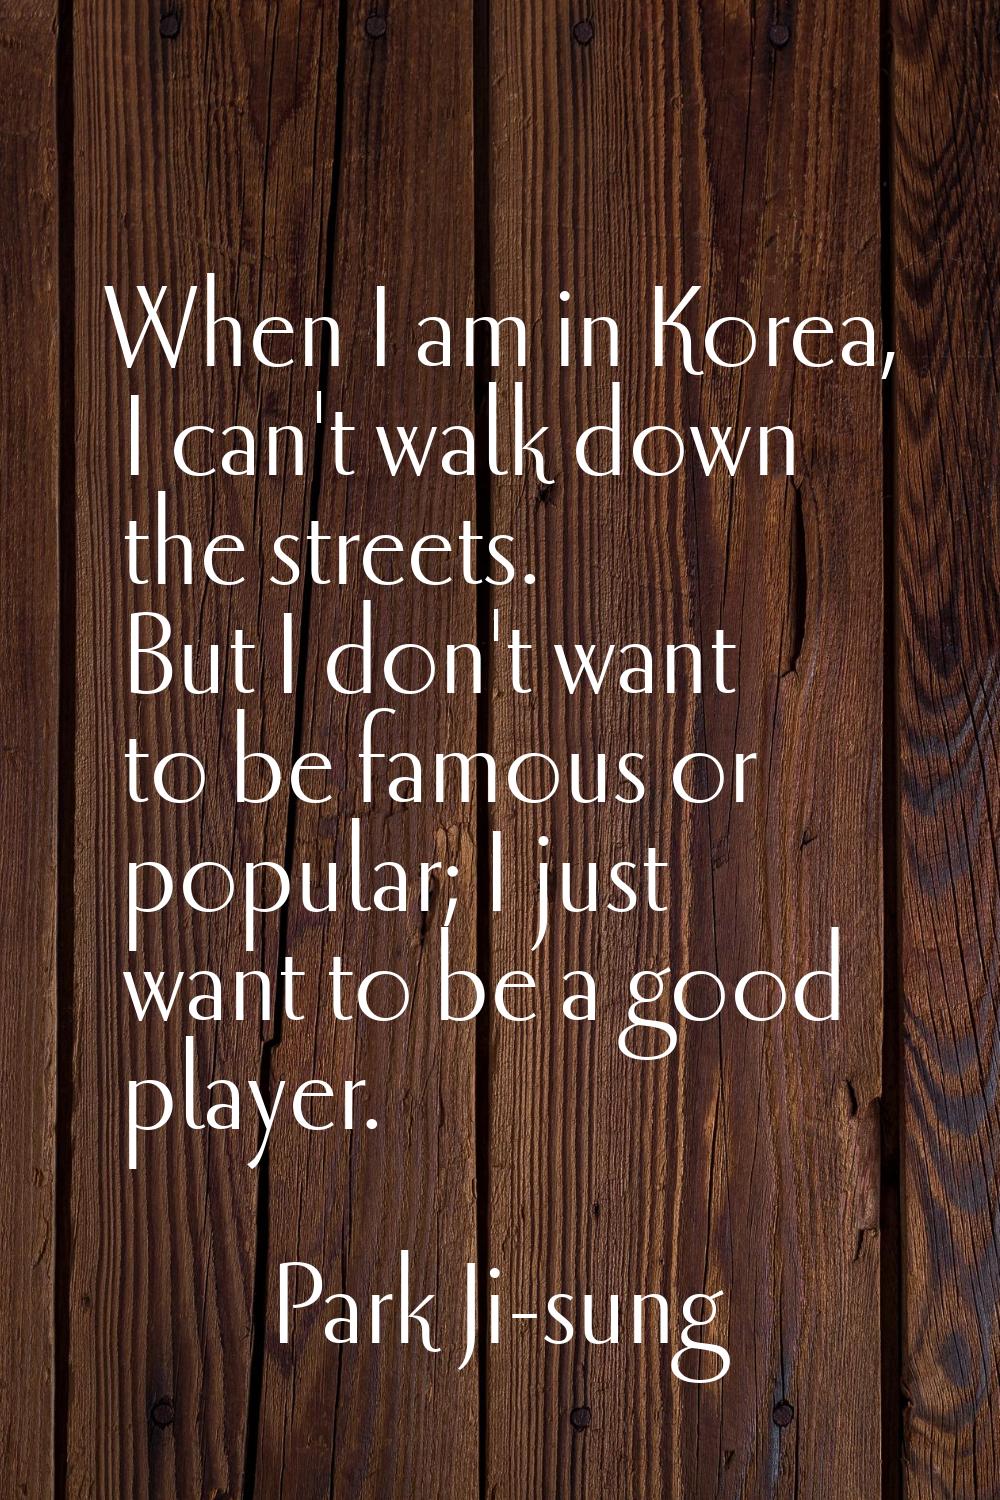 When I am in Korea, I can't walk down the streets. But I don't want to be famous or popular; I just